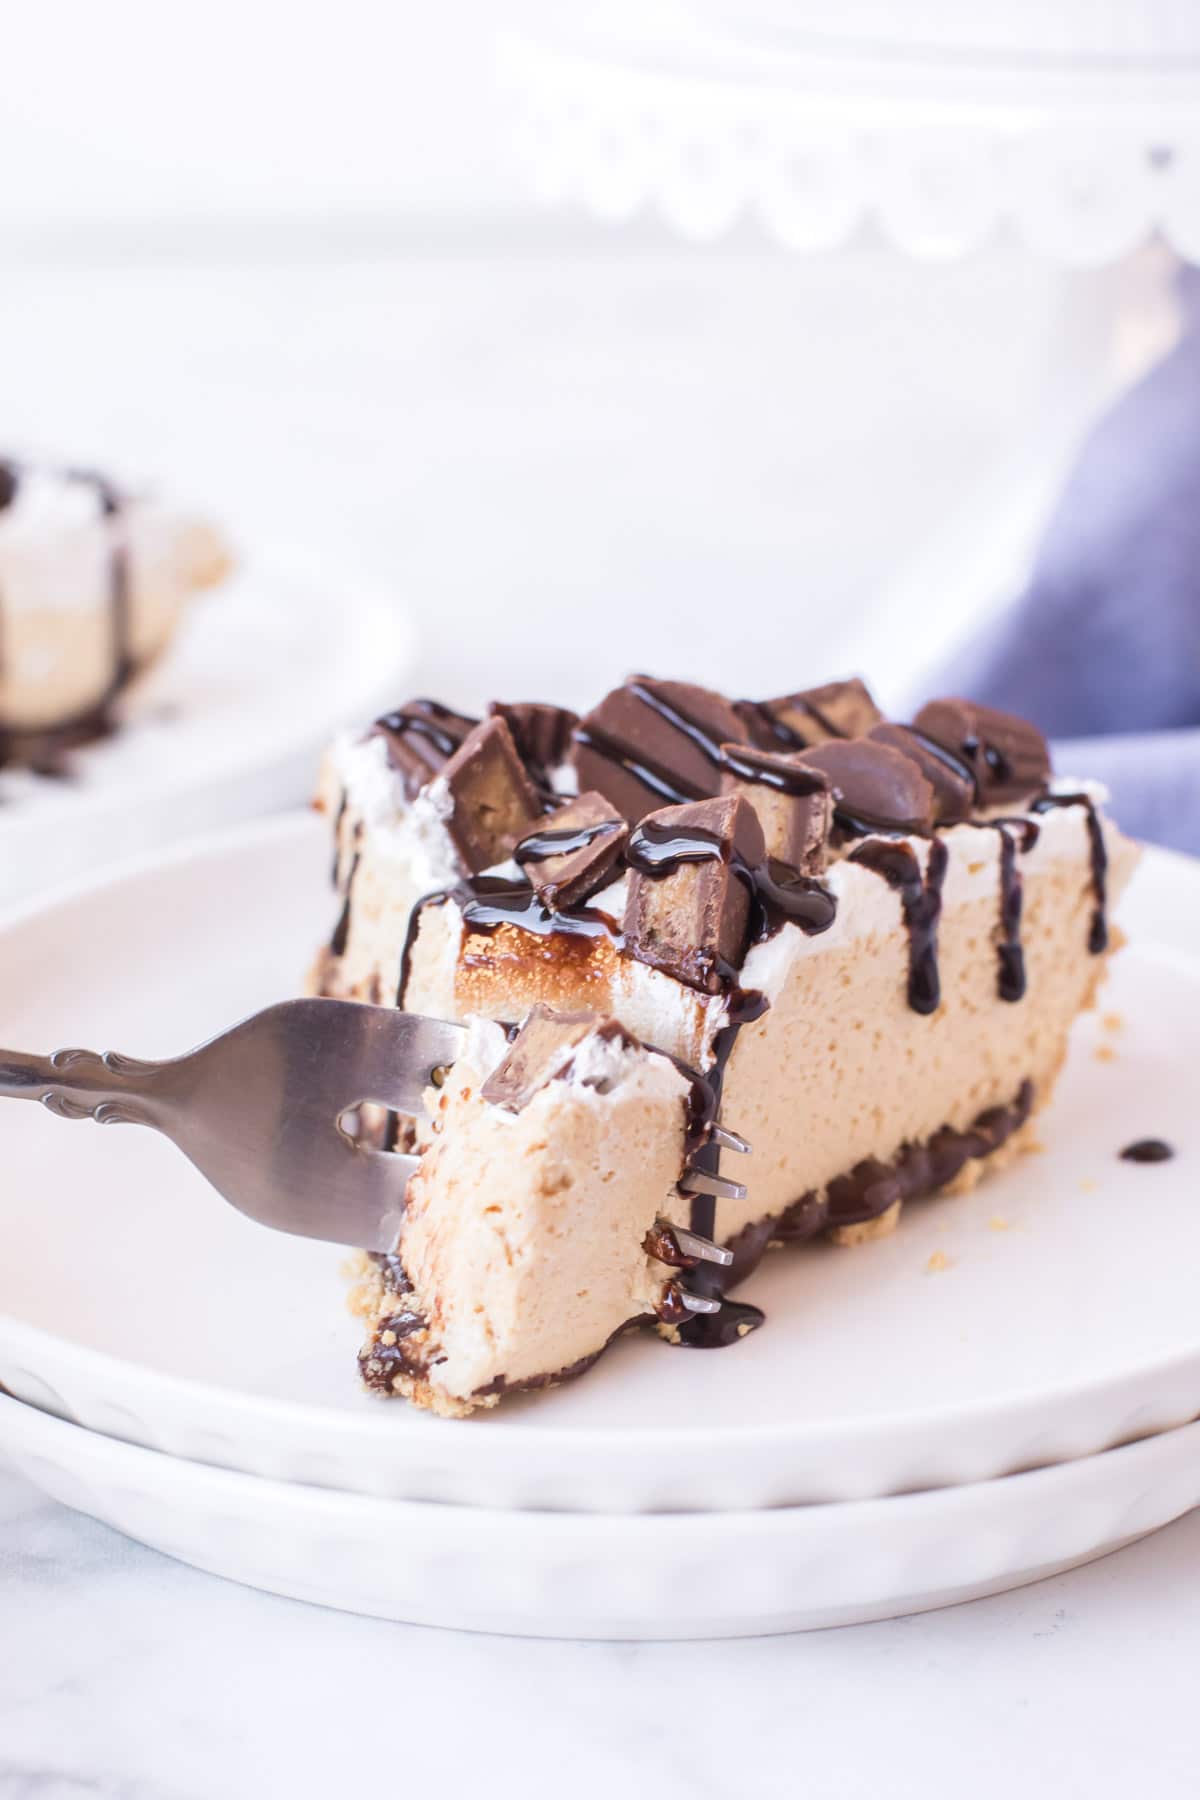 Peanut butter pie with a fork about to take a bite